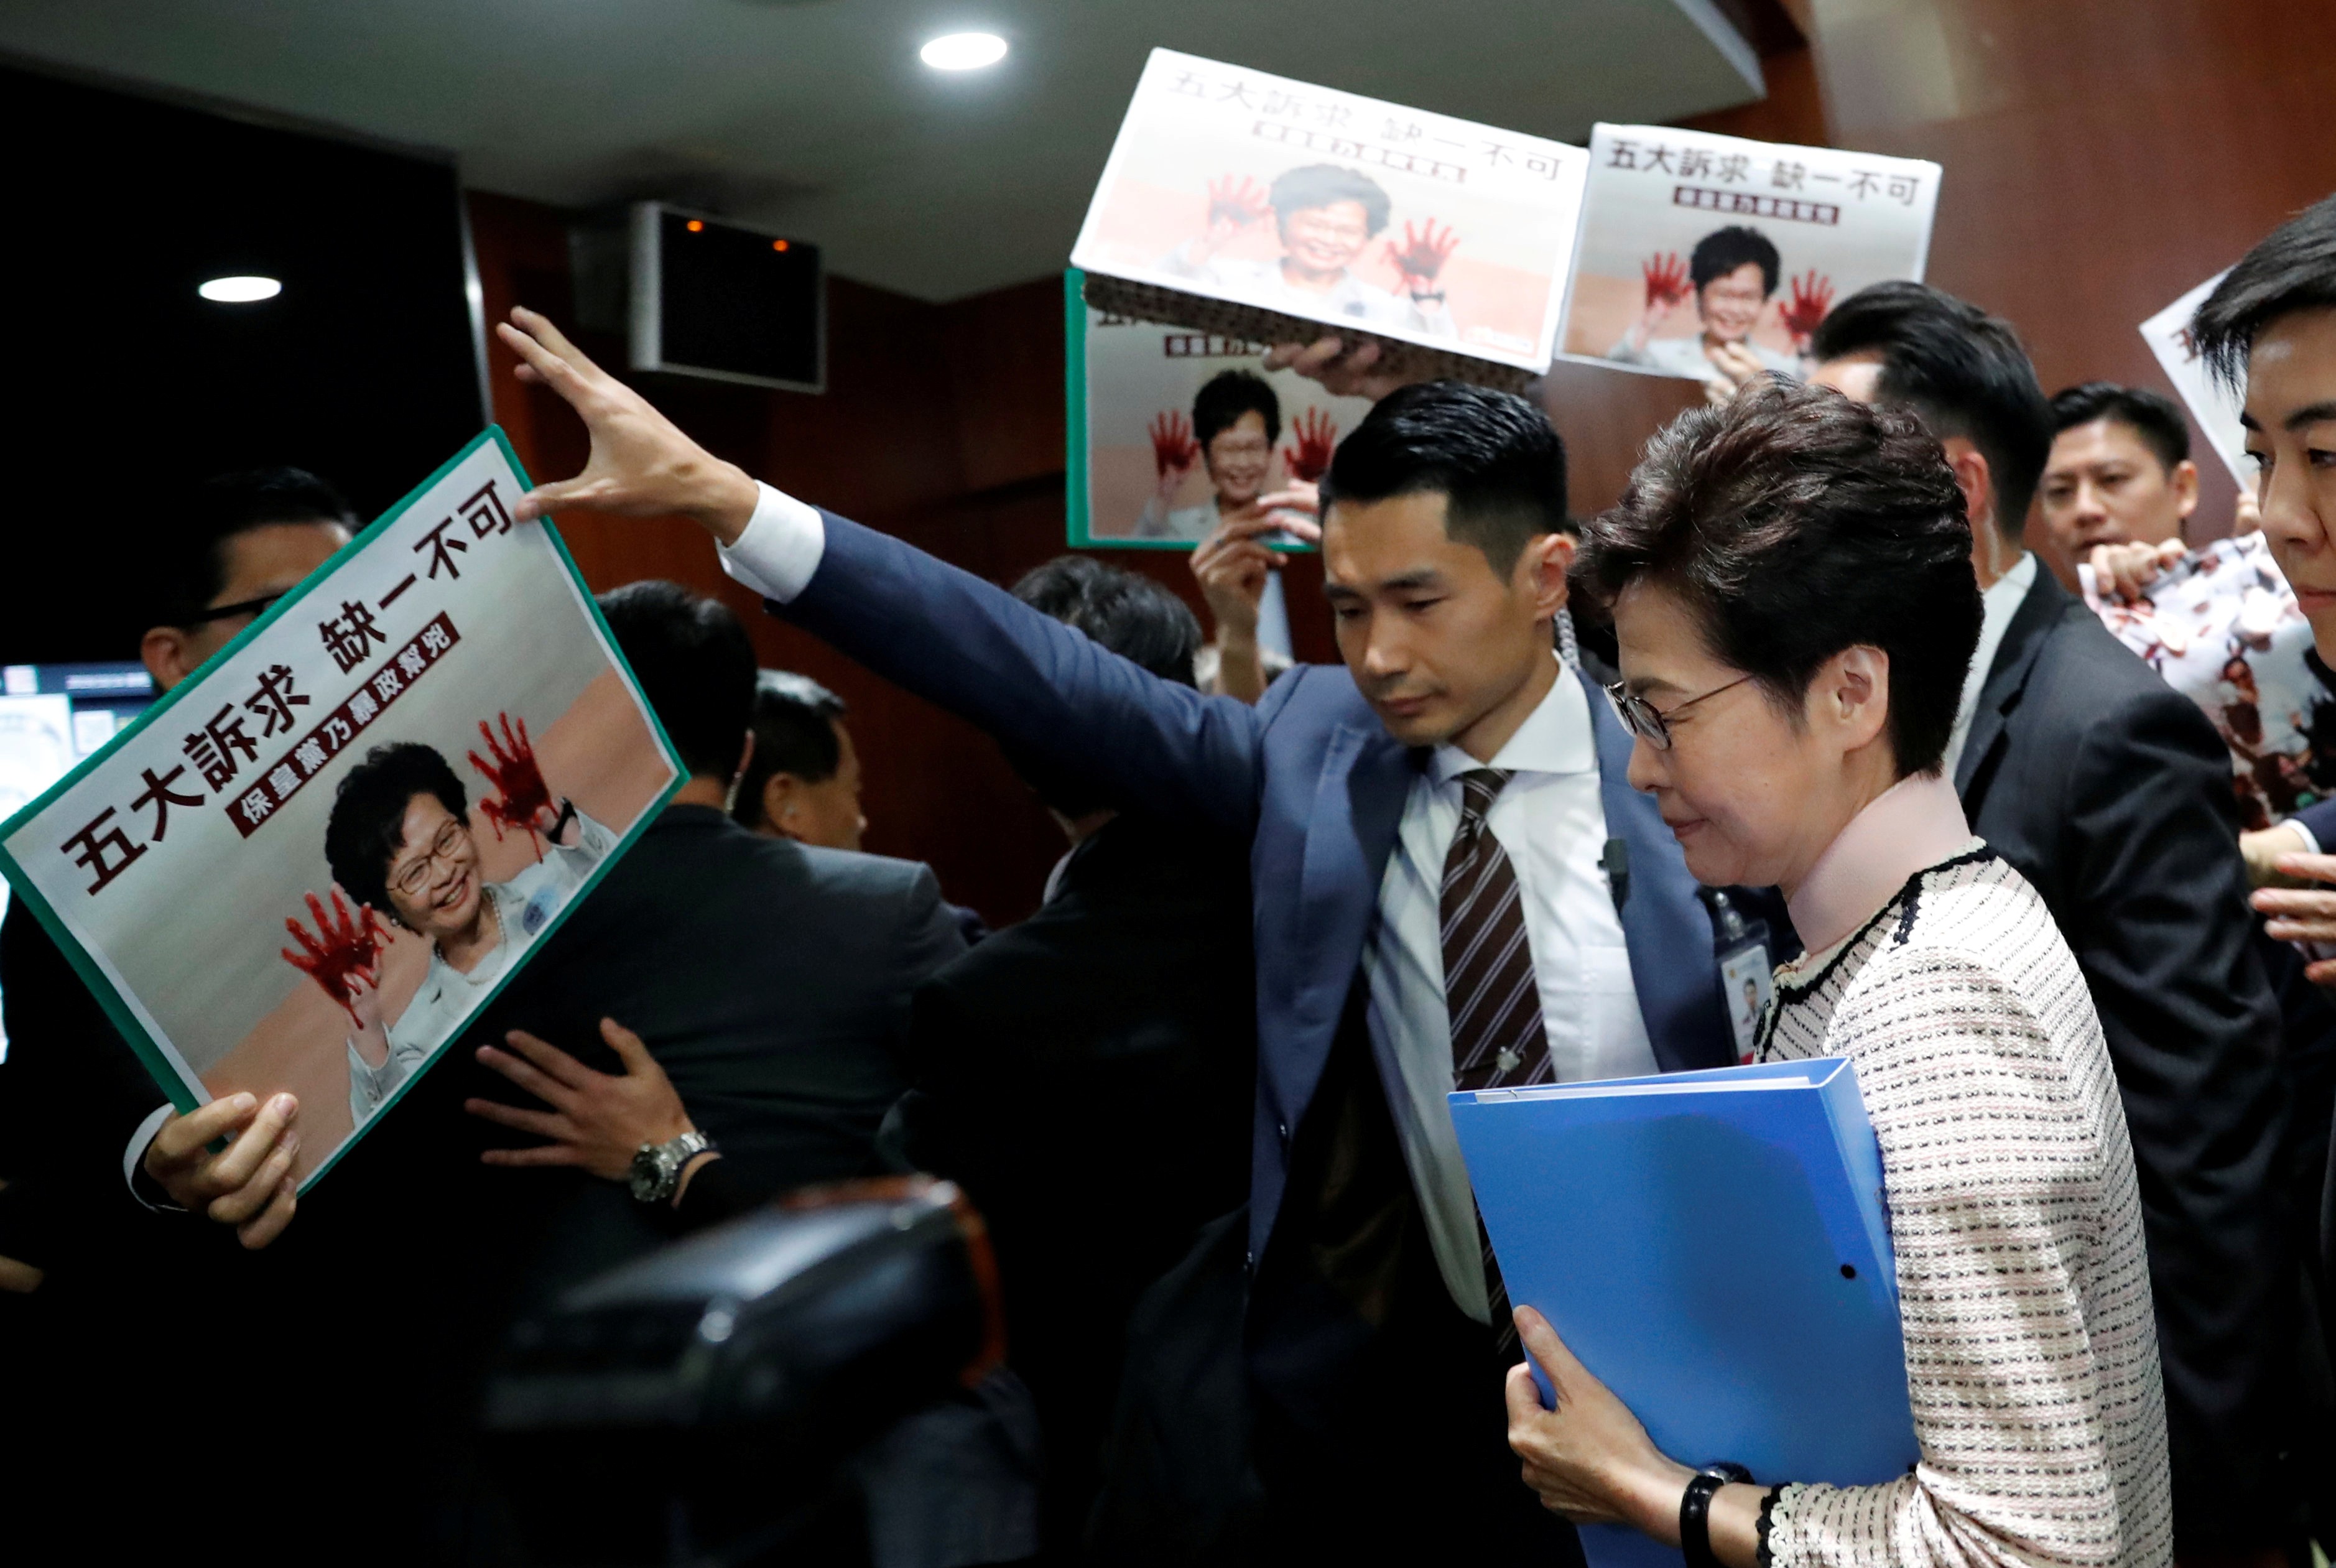 Hong Kong Chief Executive Carrie Lam is greeted by protests as she arrives at the Legislative Council on October 16 in an attempt to deliver her policy address. In the end, she was forced to deliver it in a televised address. Photo: Reuters